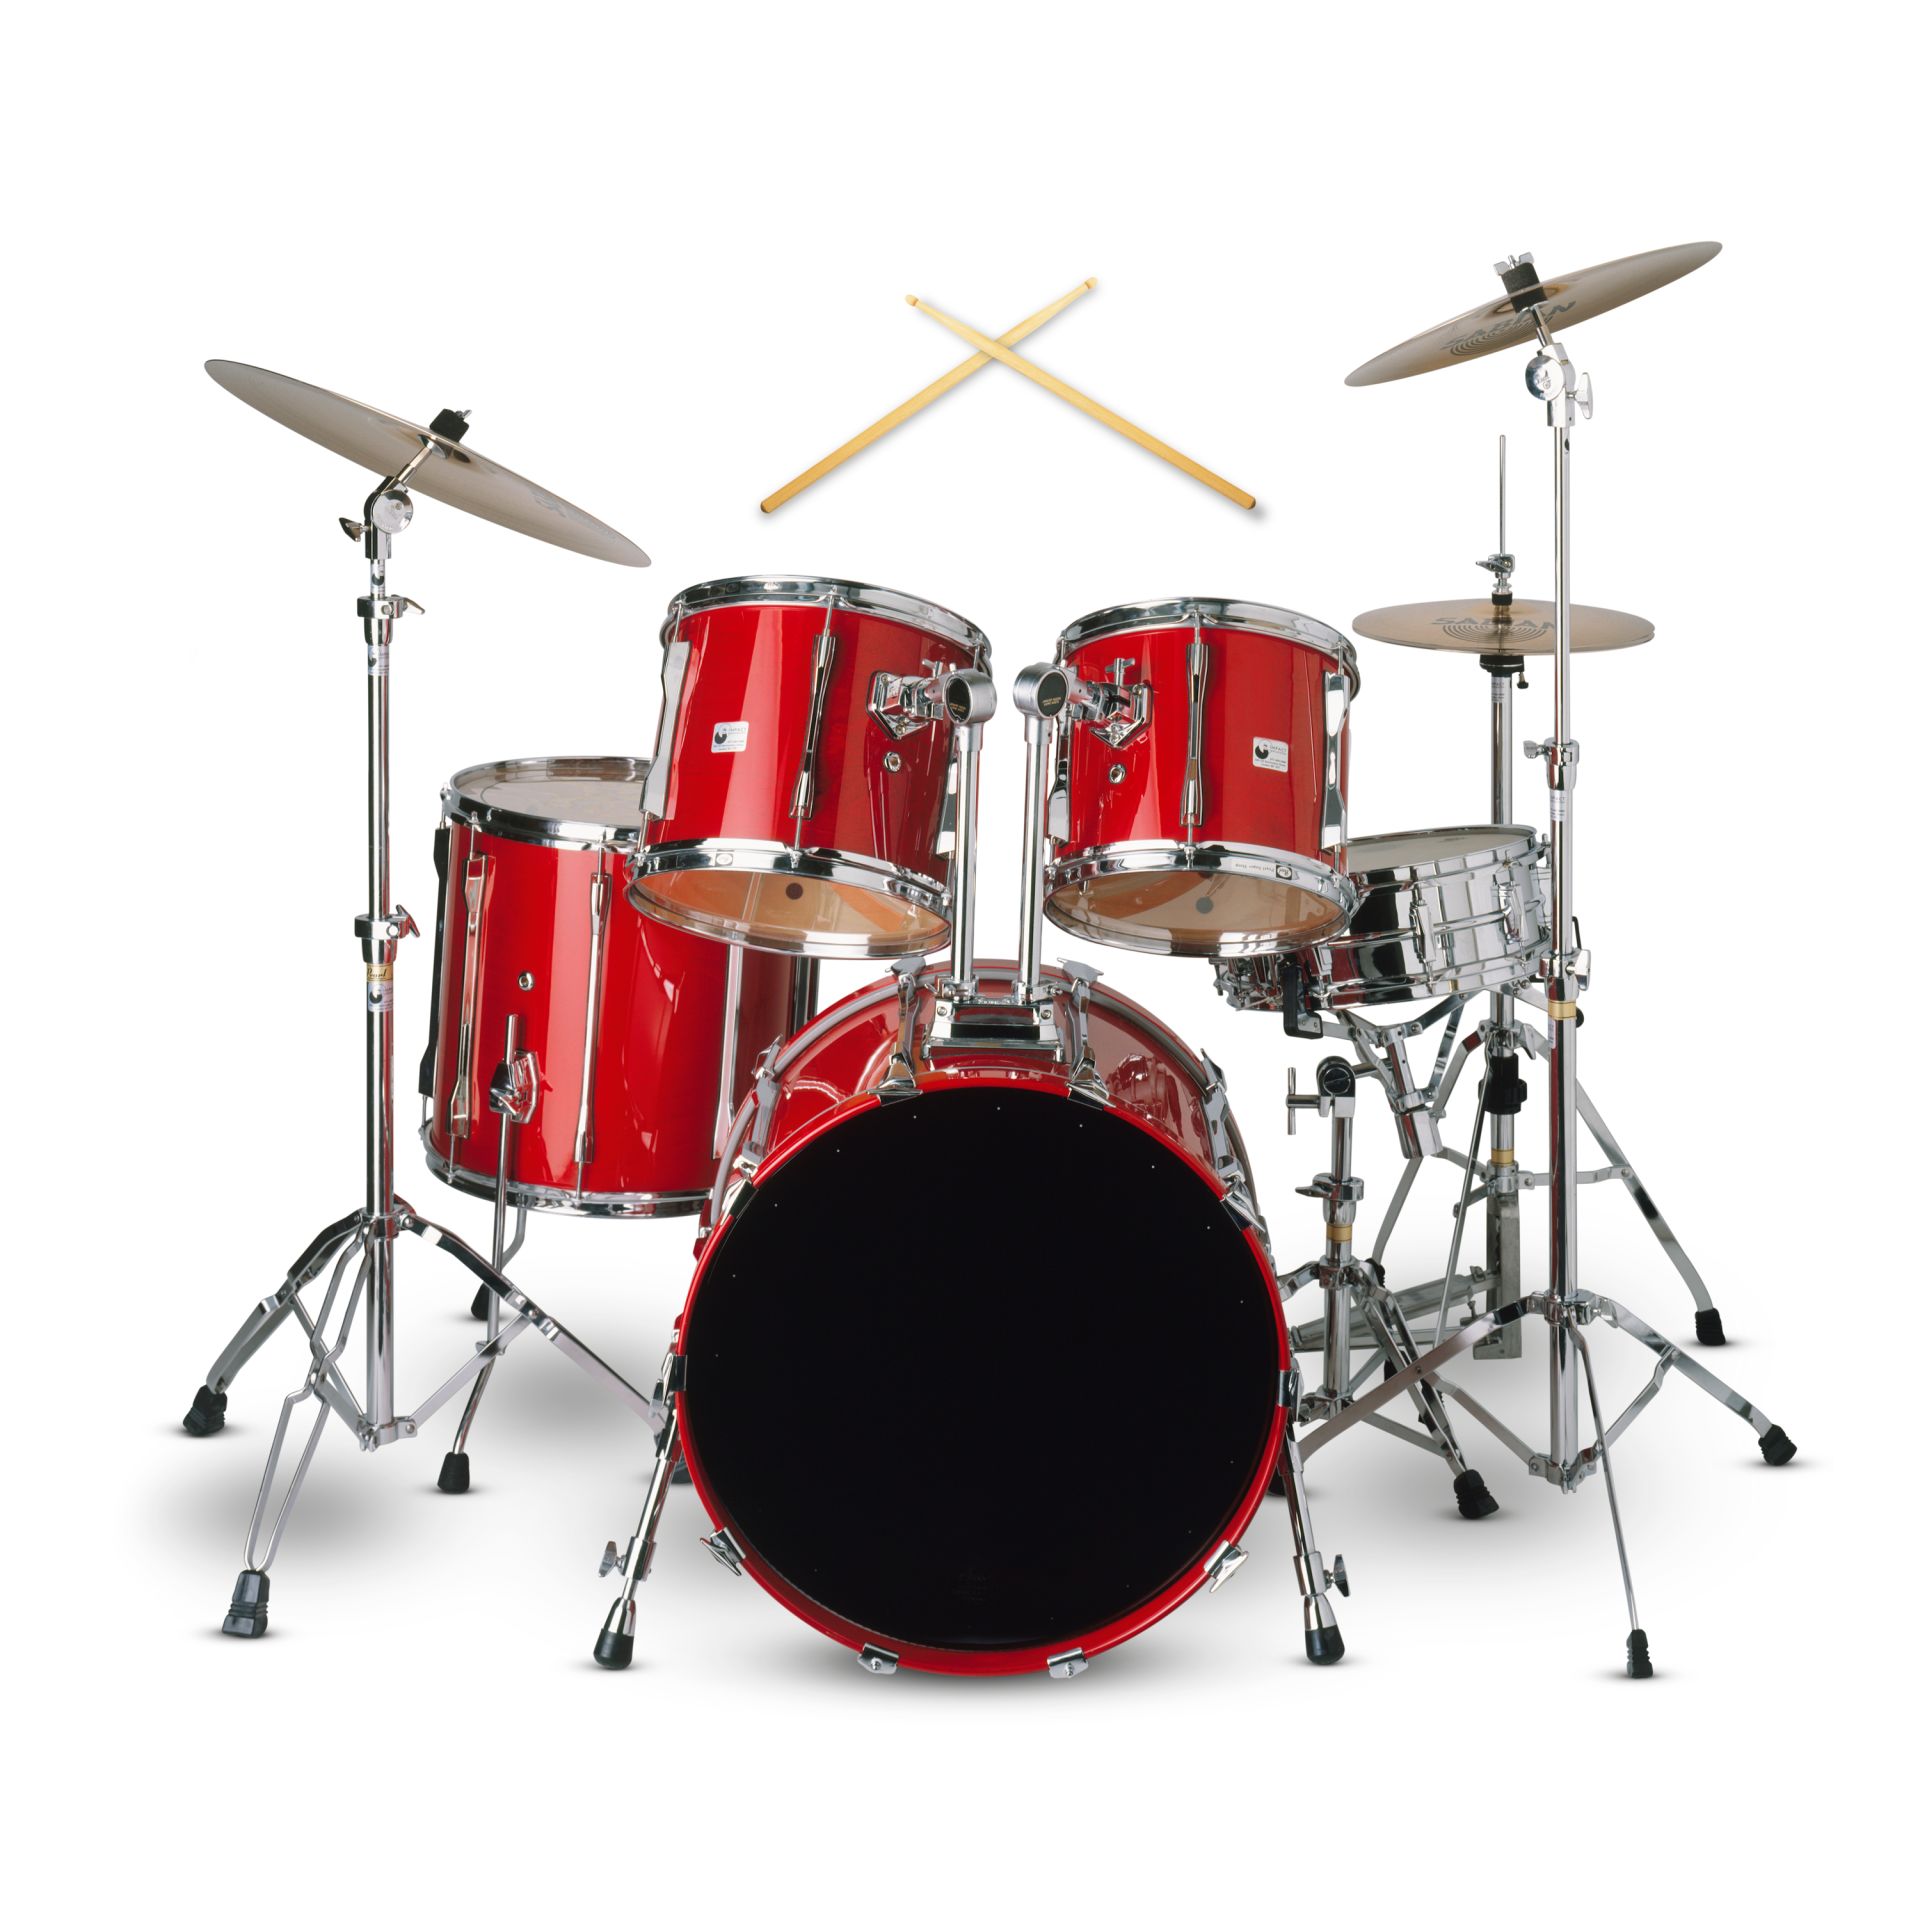 Types Of Drums | Facts About Drums | DK Find Out